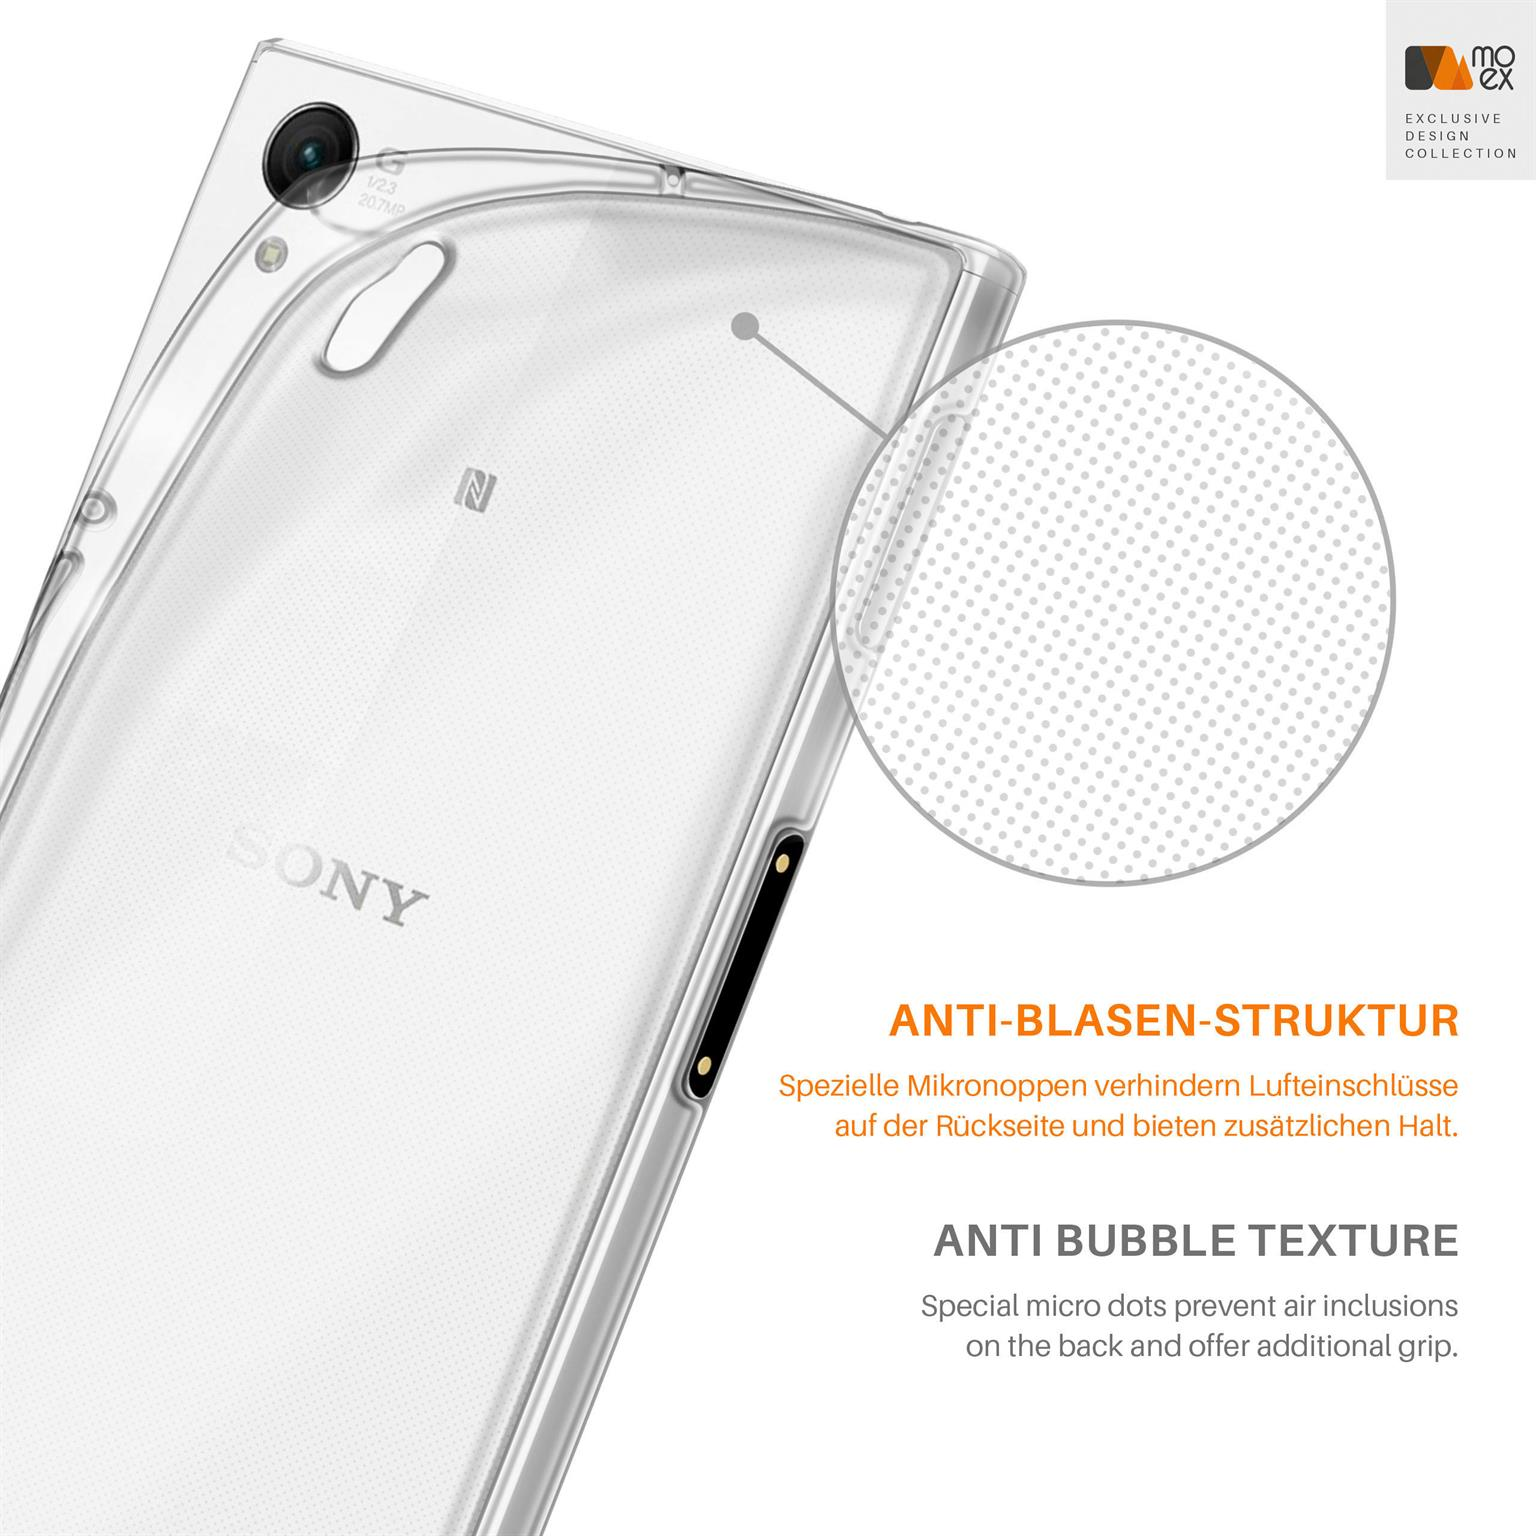 Xperia Case, MOEX Sony, Crystal-Clear Z1, Backcover, Aero